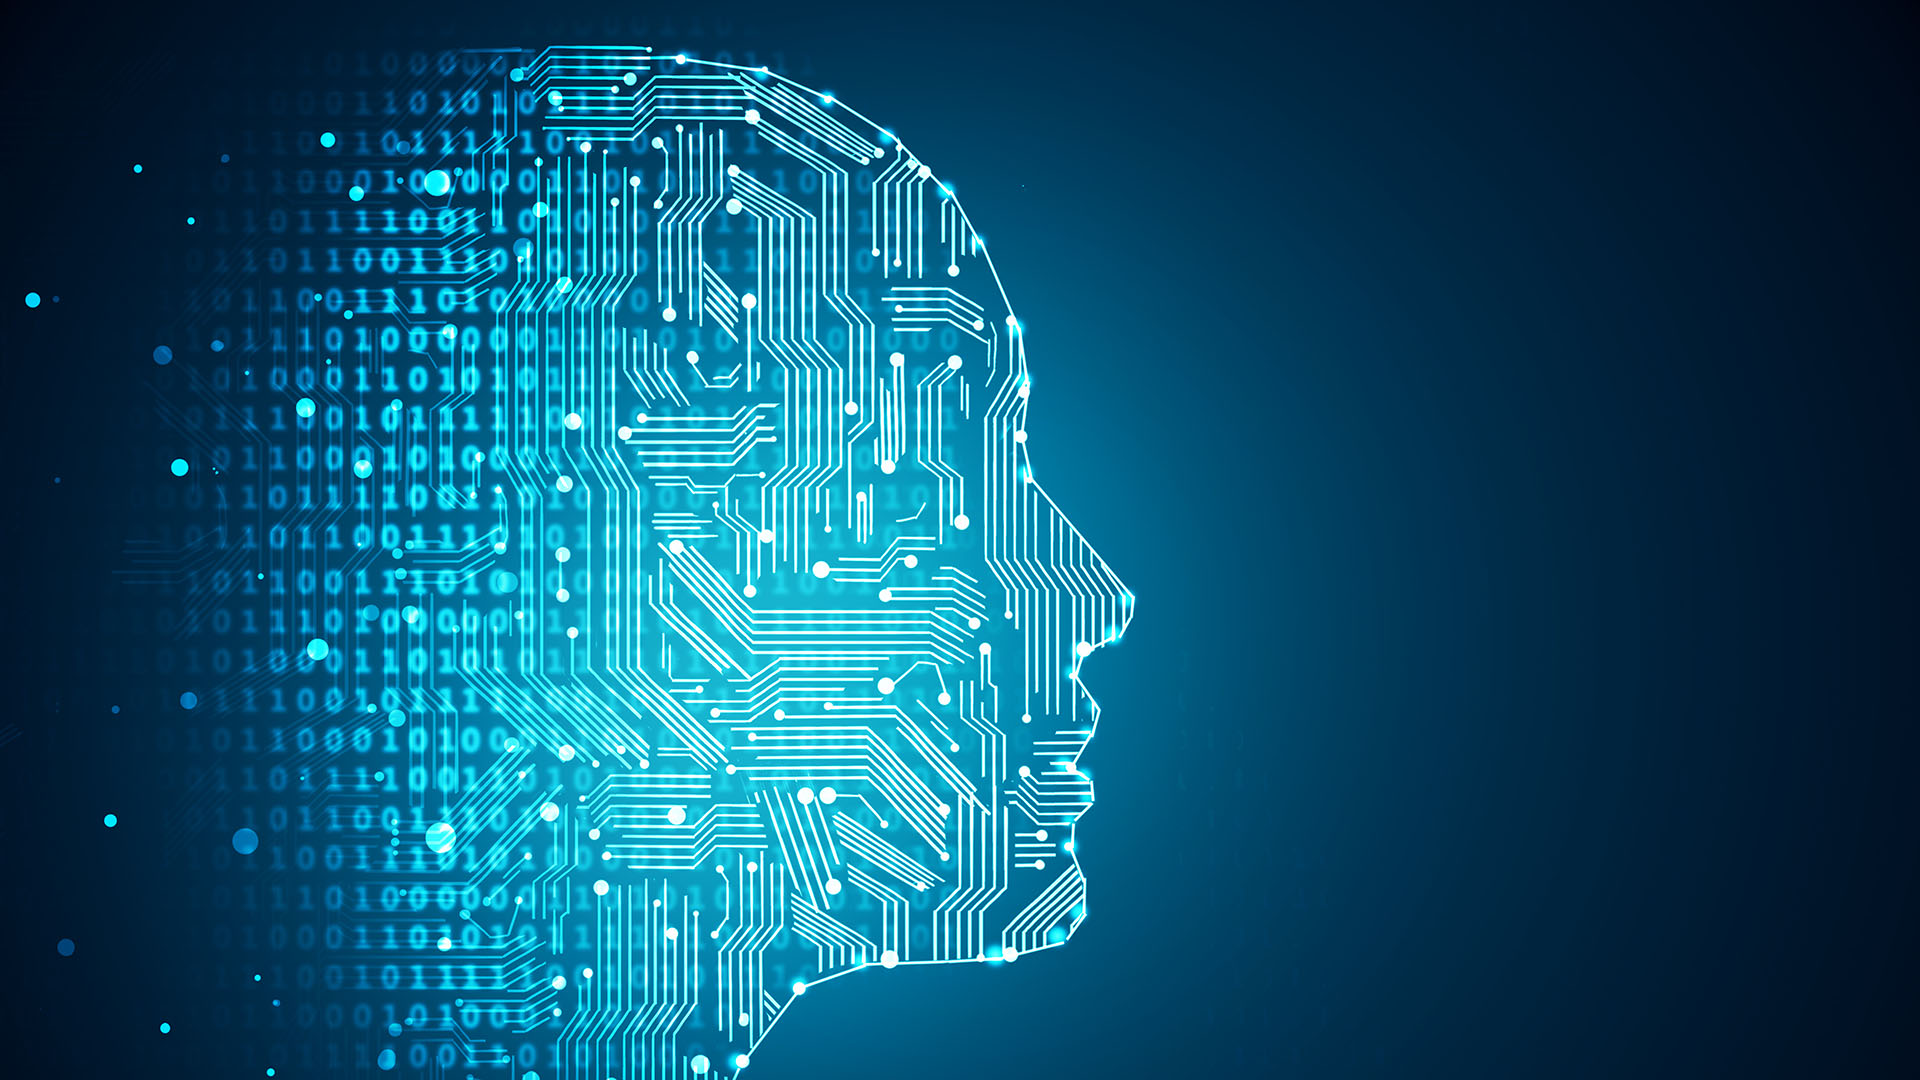 Artificial intelligence: English Court of Appeal decides artificial neural network is not patentable